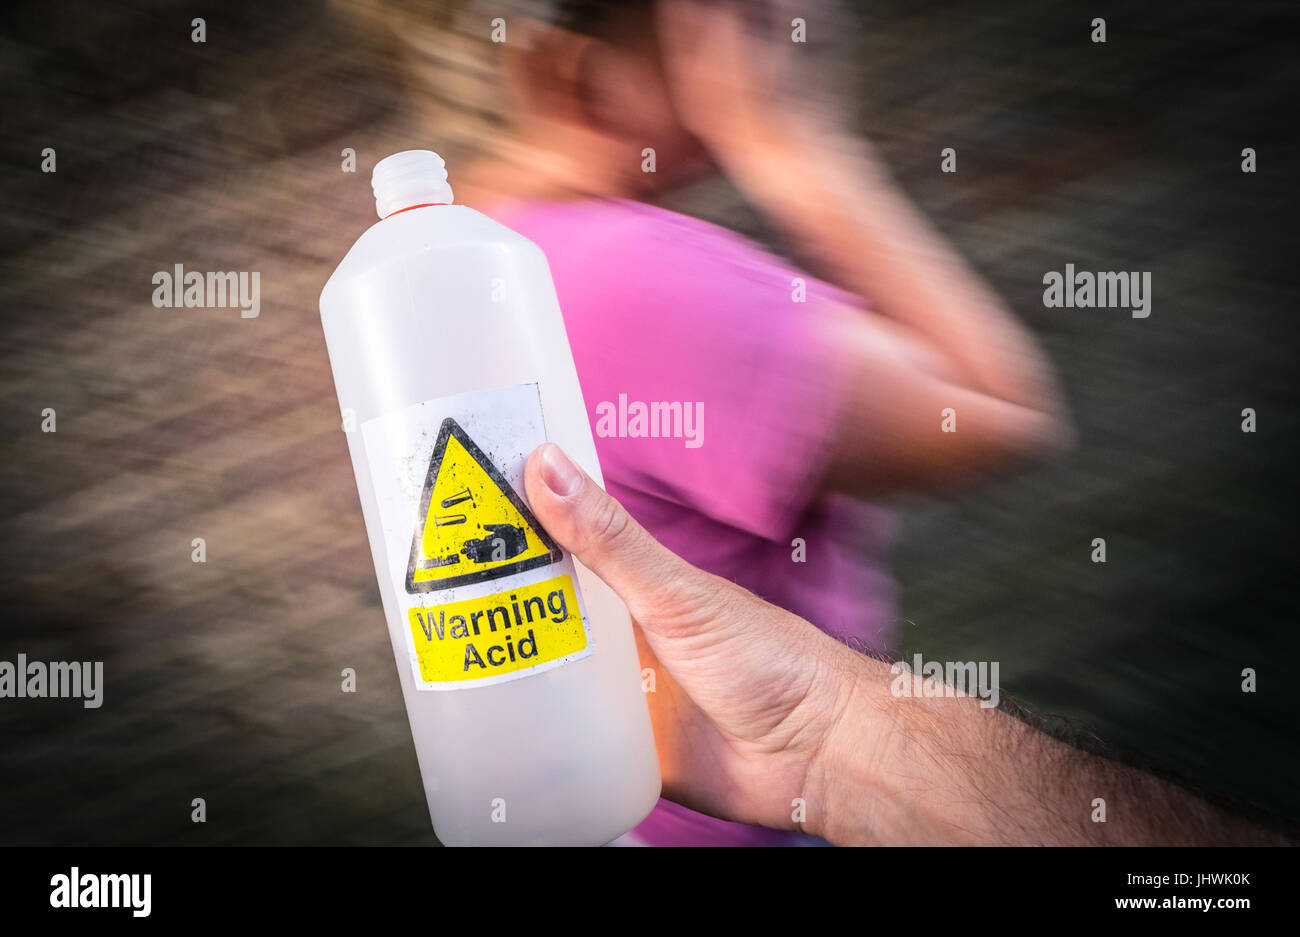 Acid Attack, A man holding an acid bottle in the street near a passing woman Stock Photo